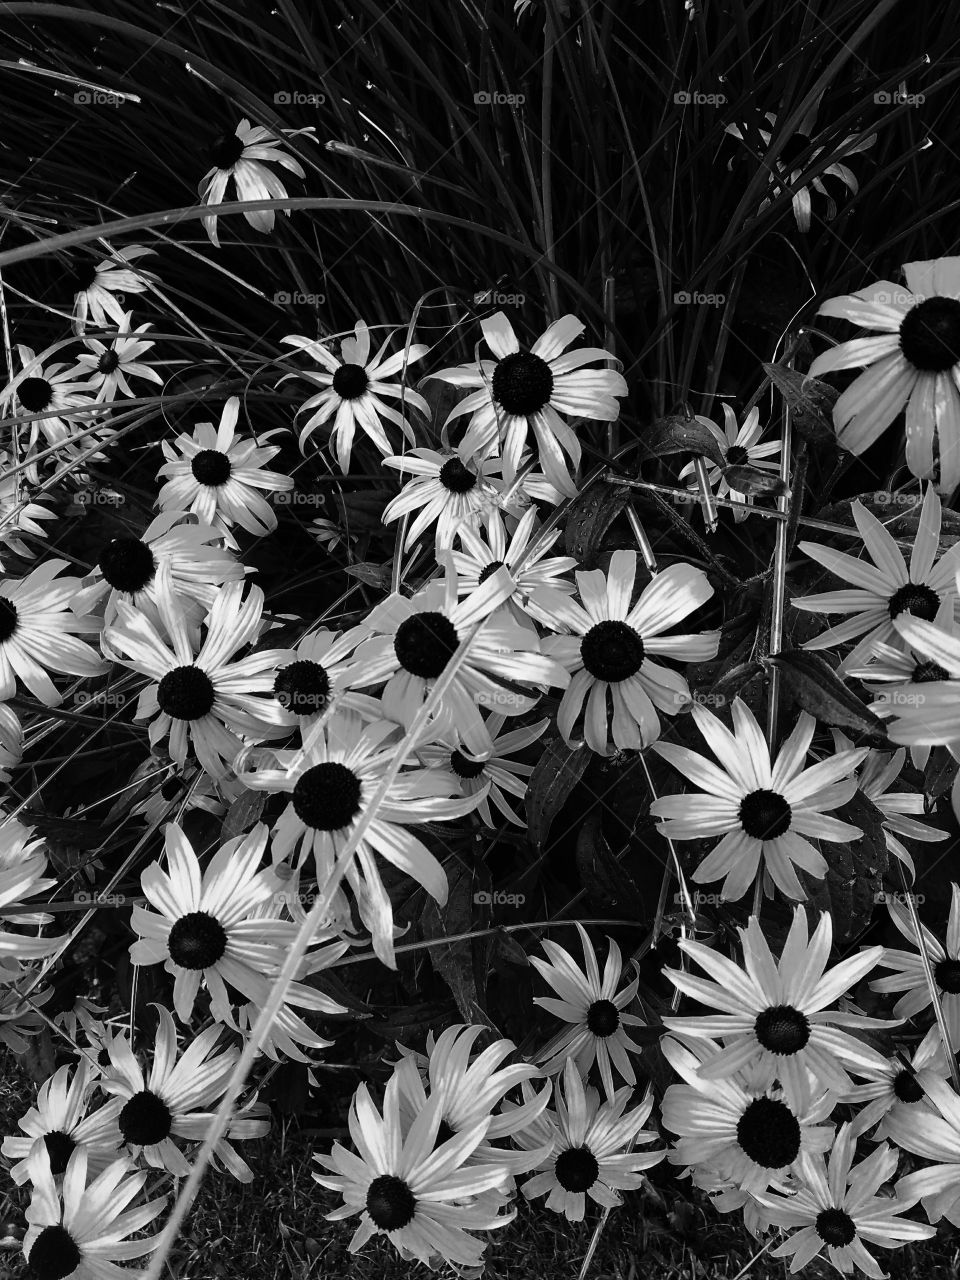 New York City - August 2017 - Taken on Android Phone - Galaxy S7 - BNW Filter - Black Eyed Susan Flowers in Bayside NY